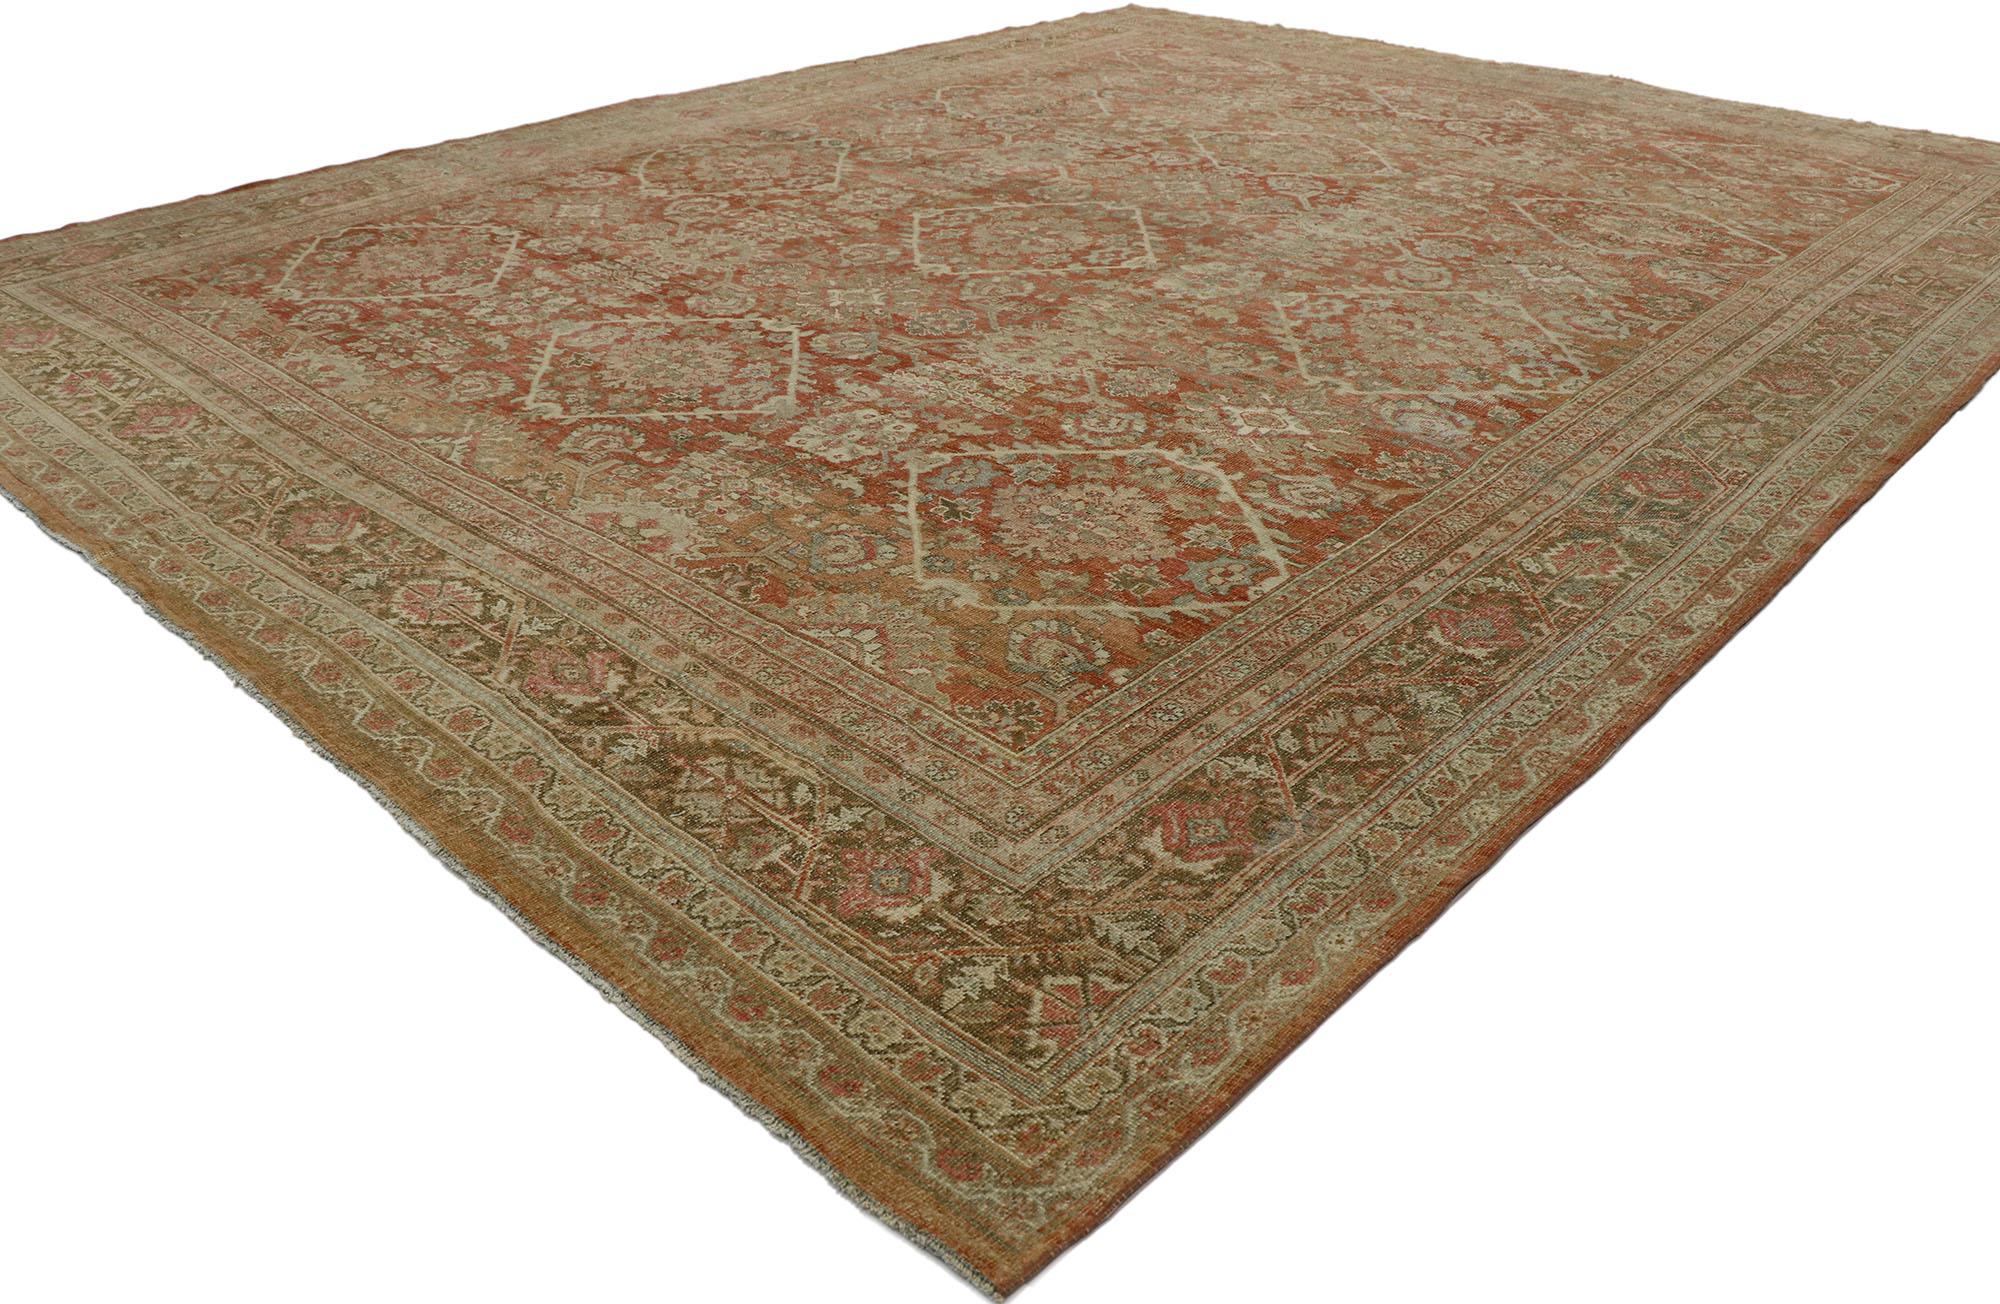 53171 Distressed antique Persian Mahal rug with rustic Spanish Mission style. Effortless beauty and soft, bespoke vibes meet rustic Spanish Mission style in this hand knotted wool distressed antique Persian Mahal rug. The lovingly time-worn field